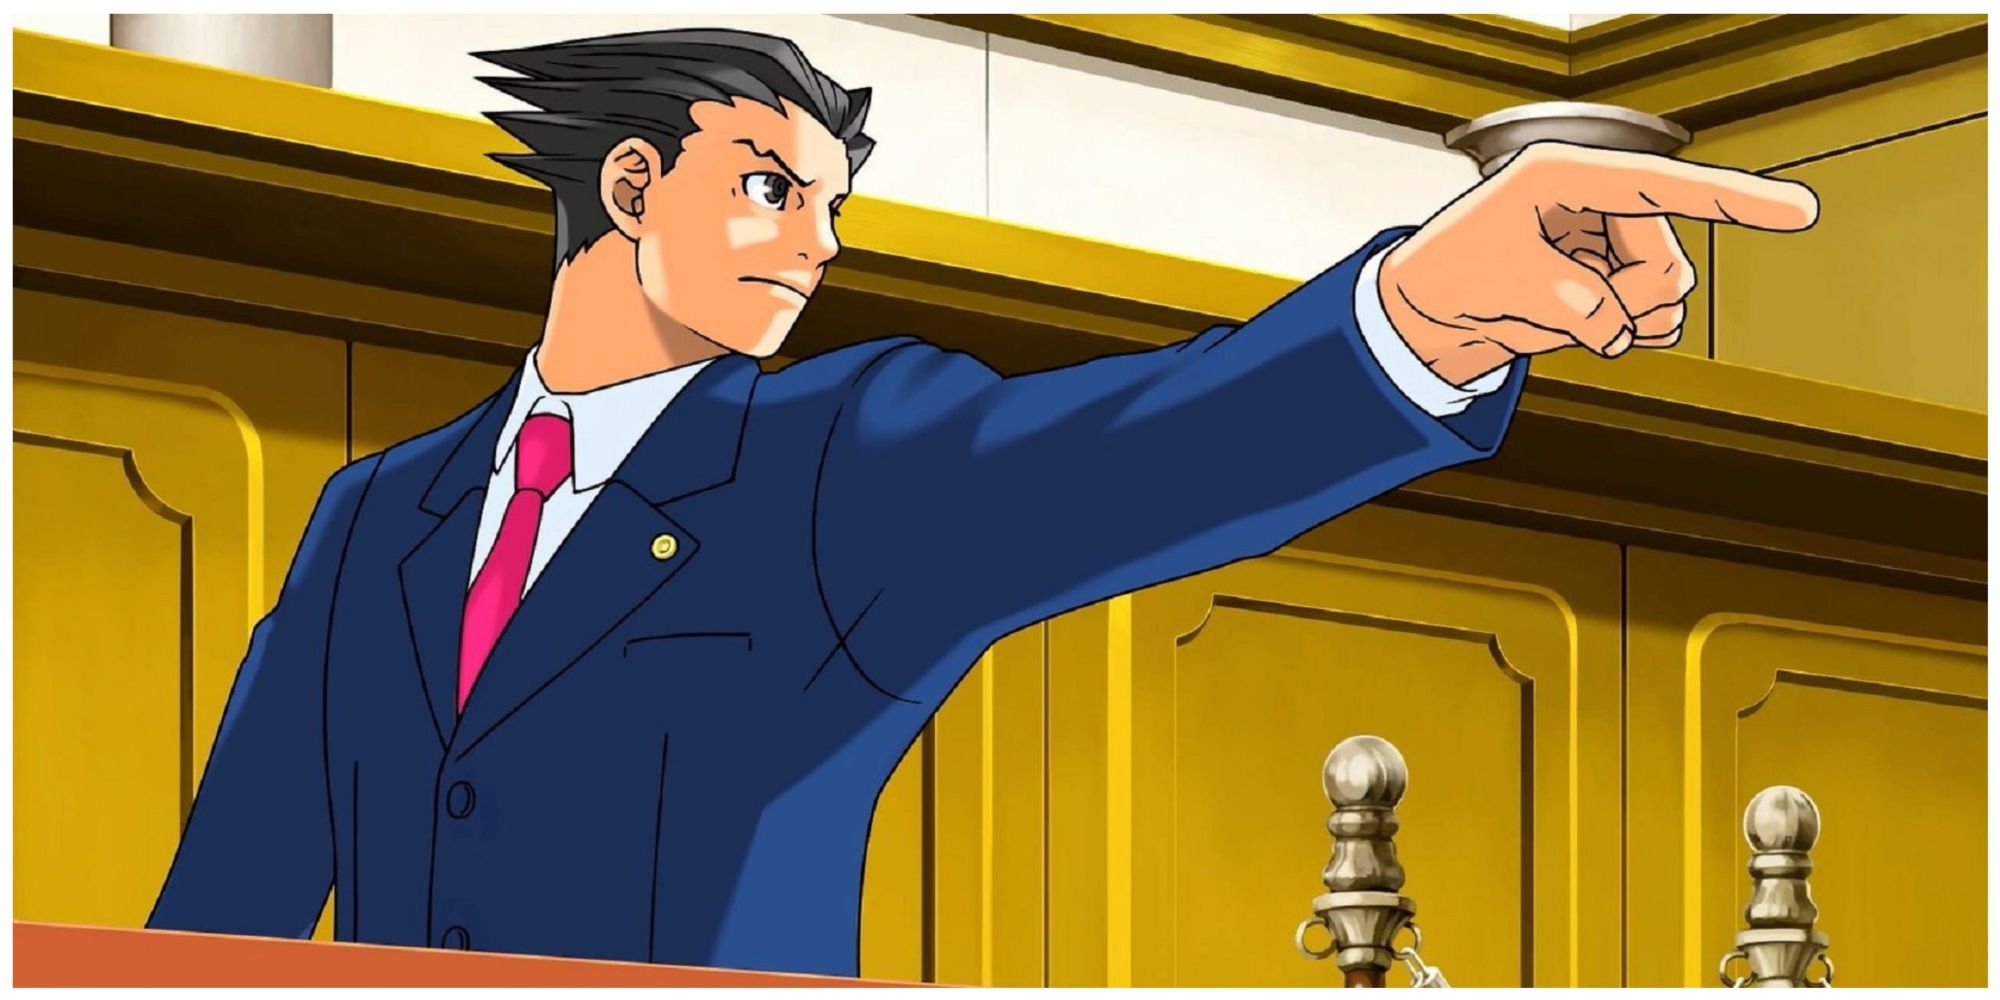 Phoenix Wright preparing to object in court, raising his finger